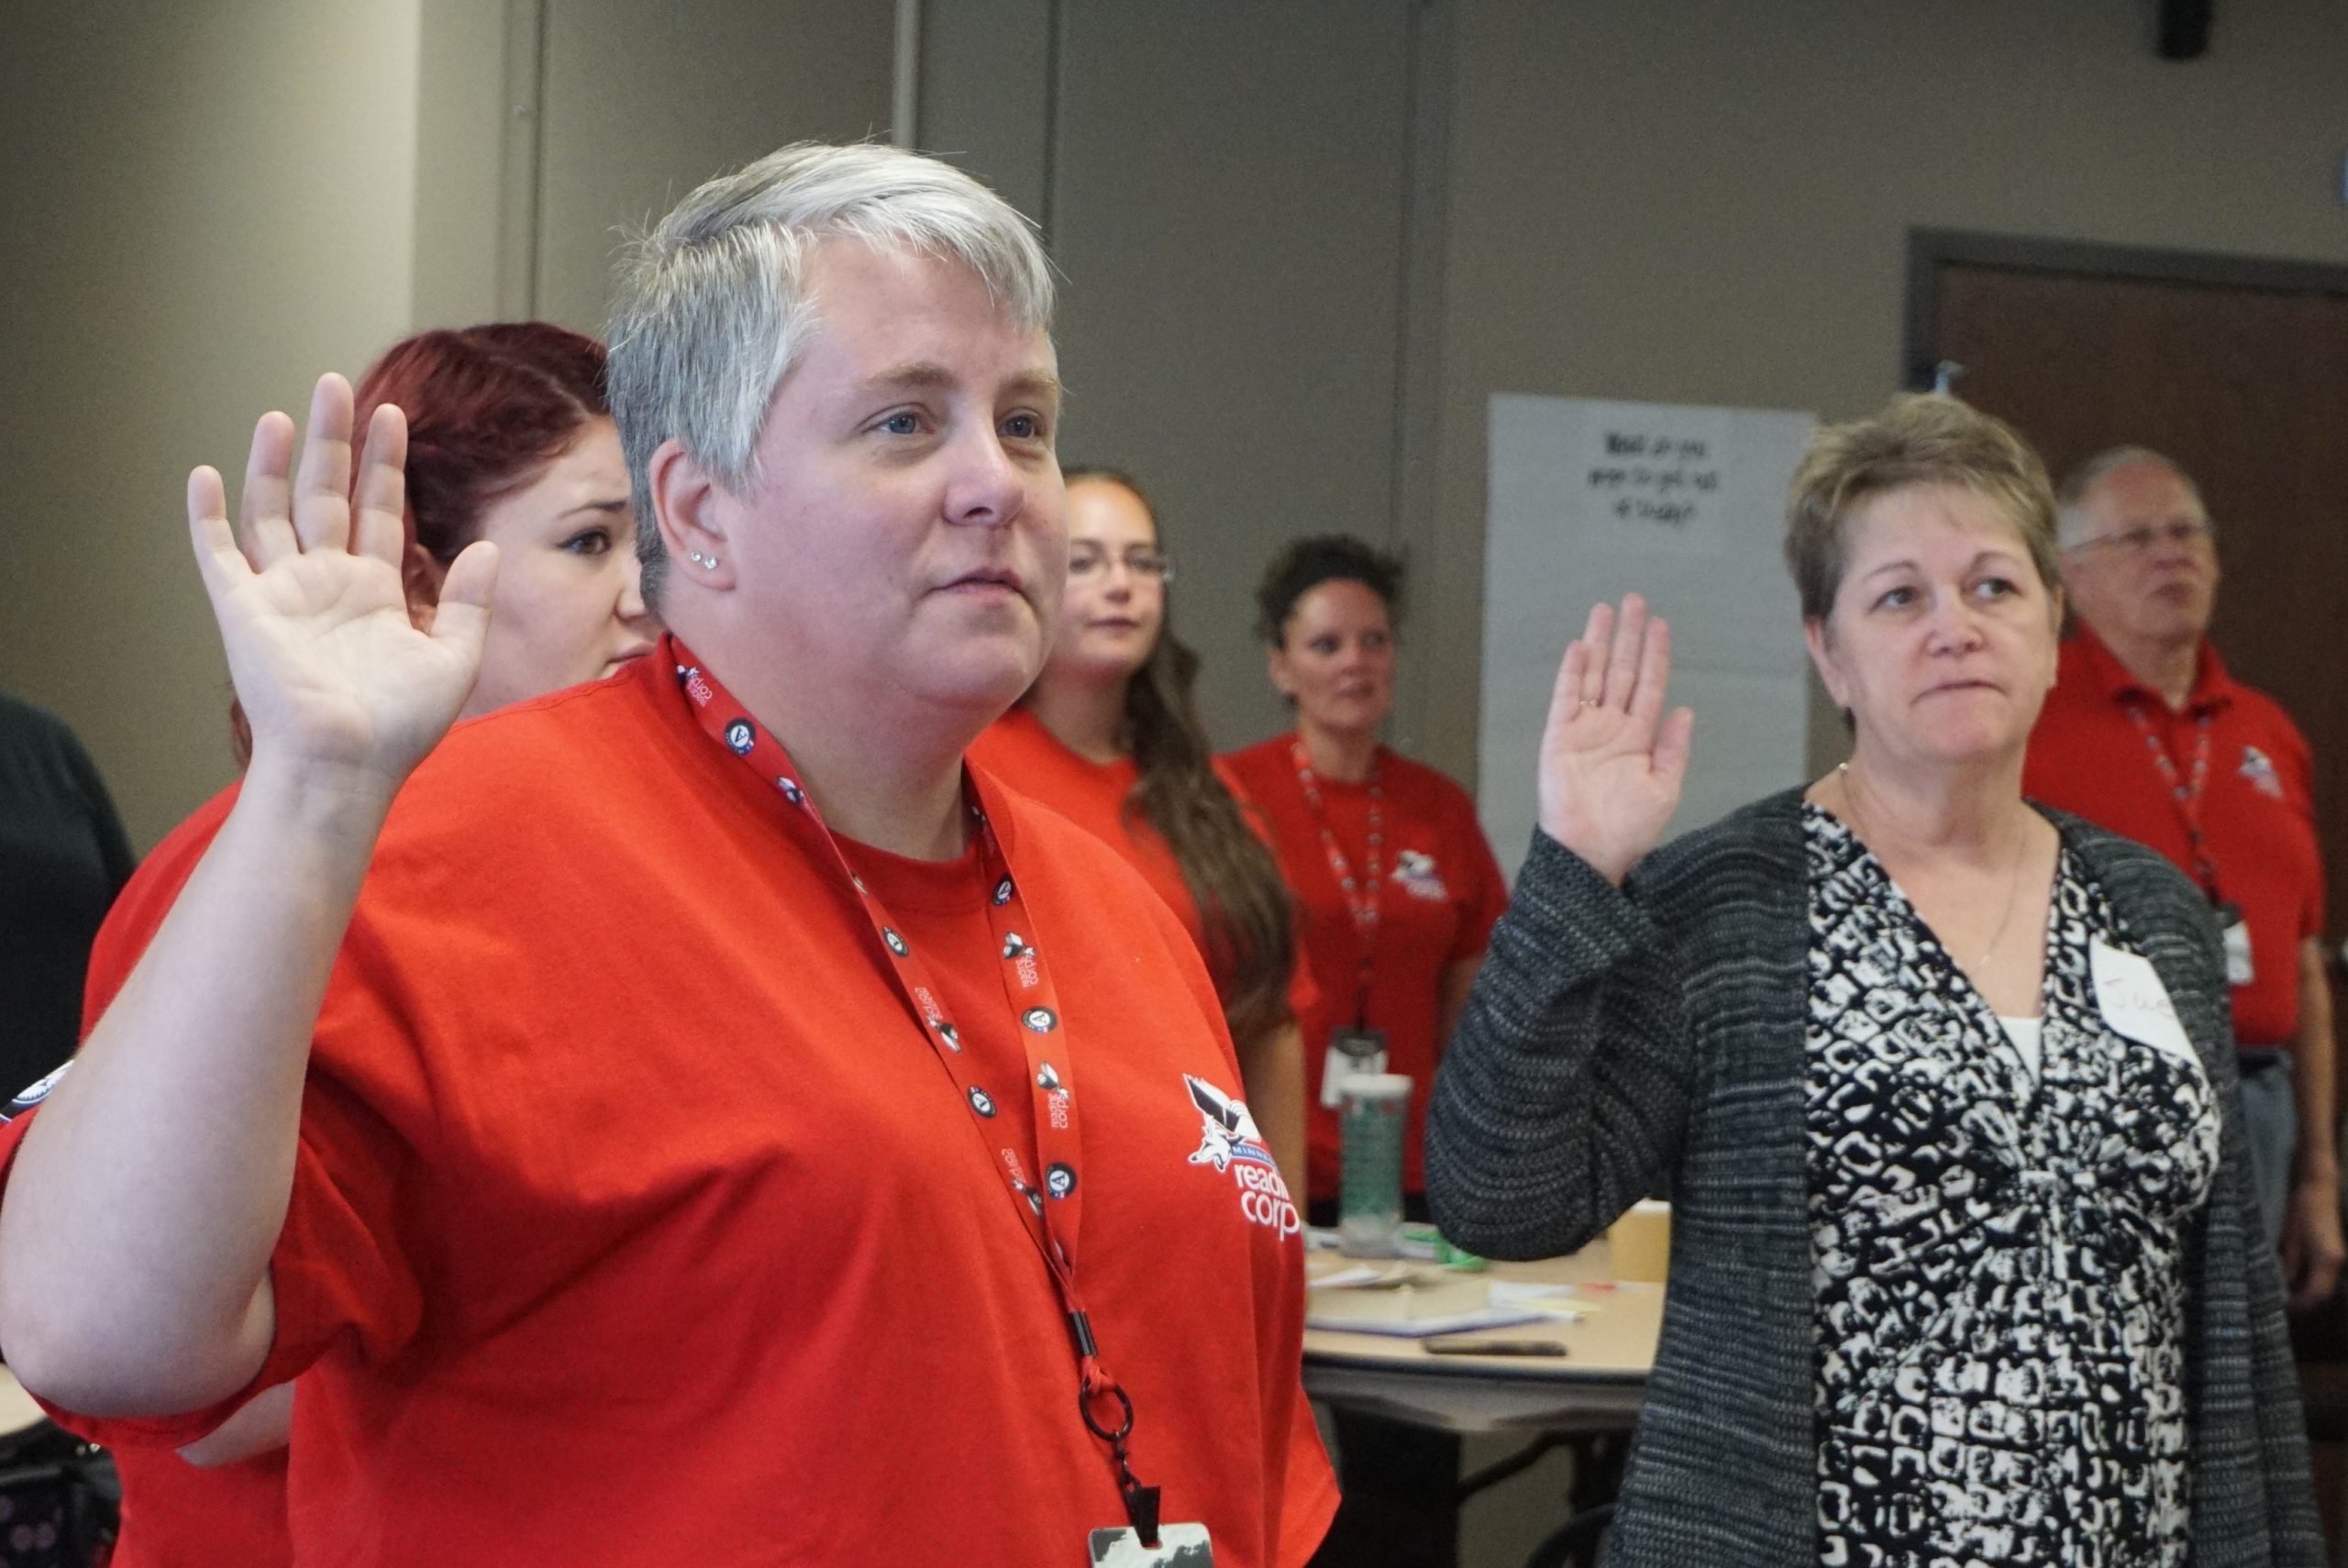 Rochester members raise their right hands as they take the AmeriCorps pledge